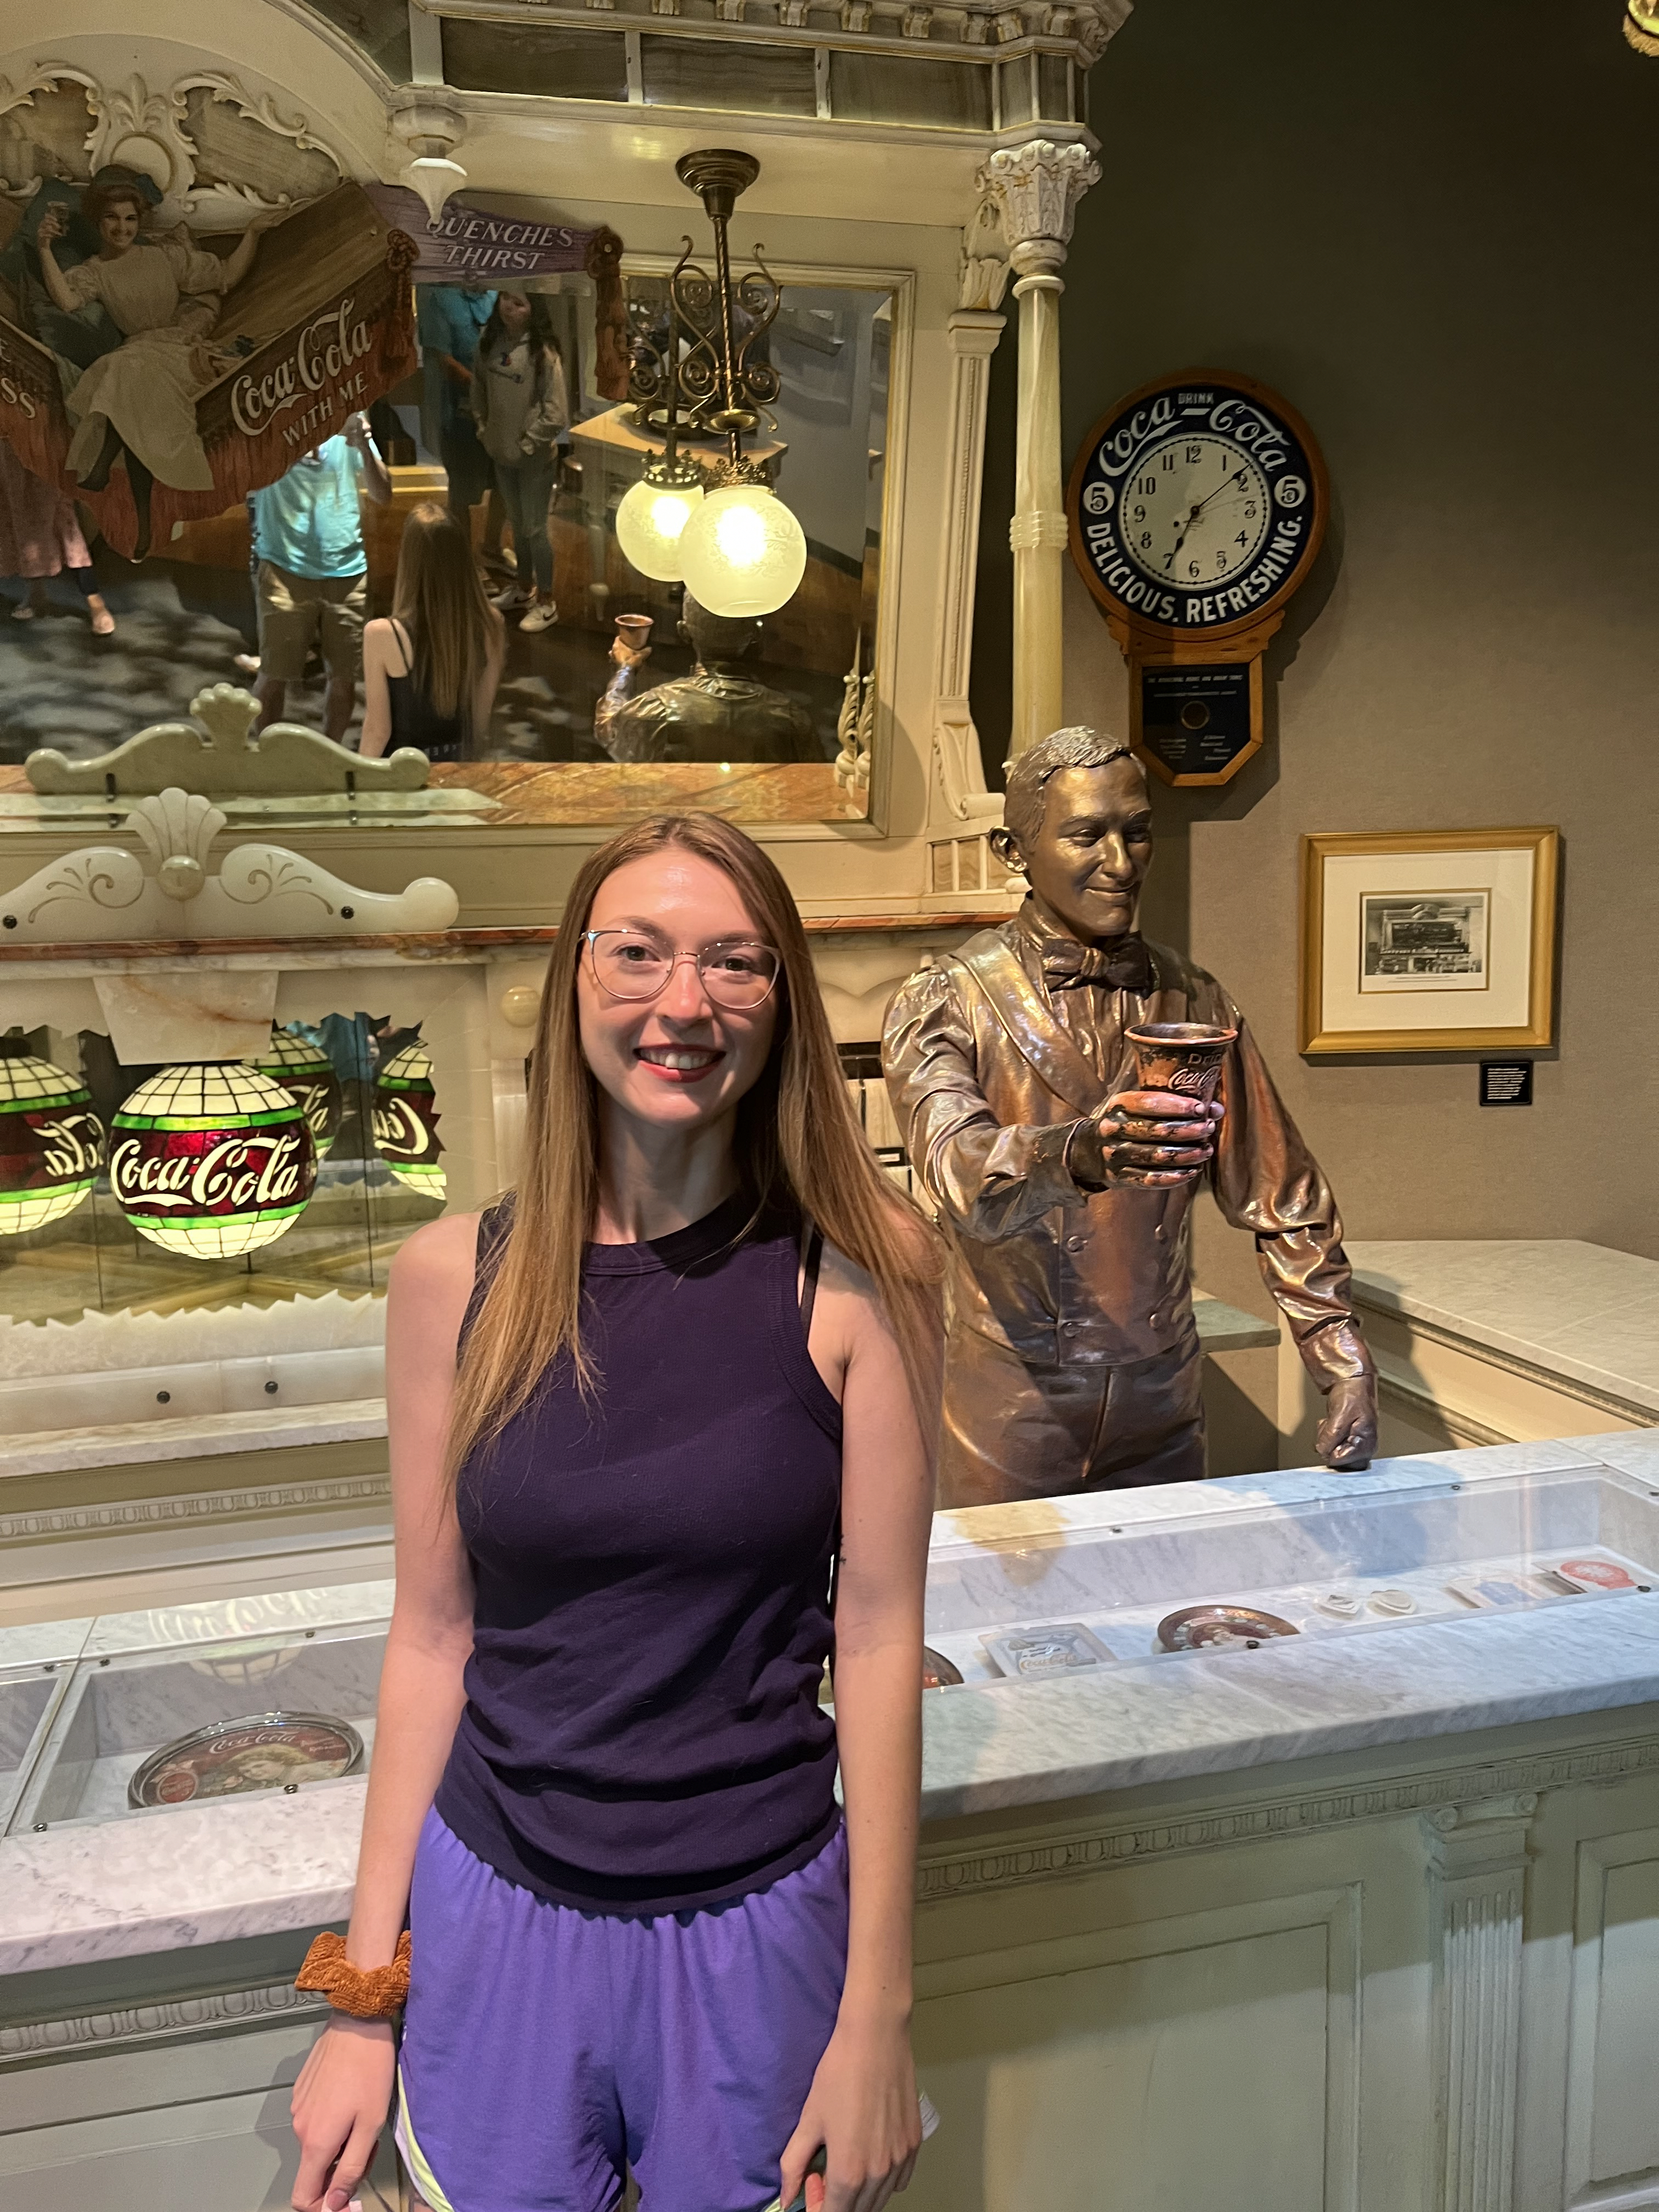 Tiffany smiling in front of a retro soda fountain with a statue of the founder of Coca-Cola, John Pemberton